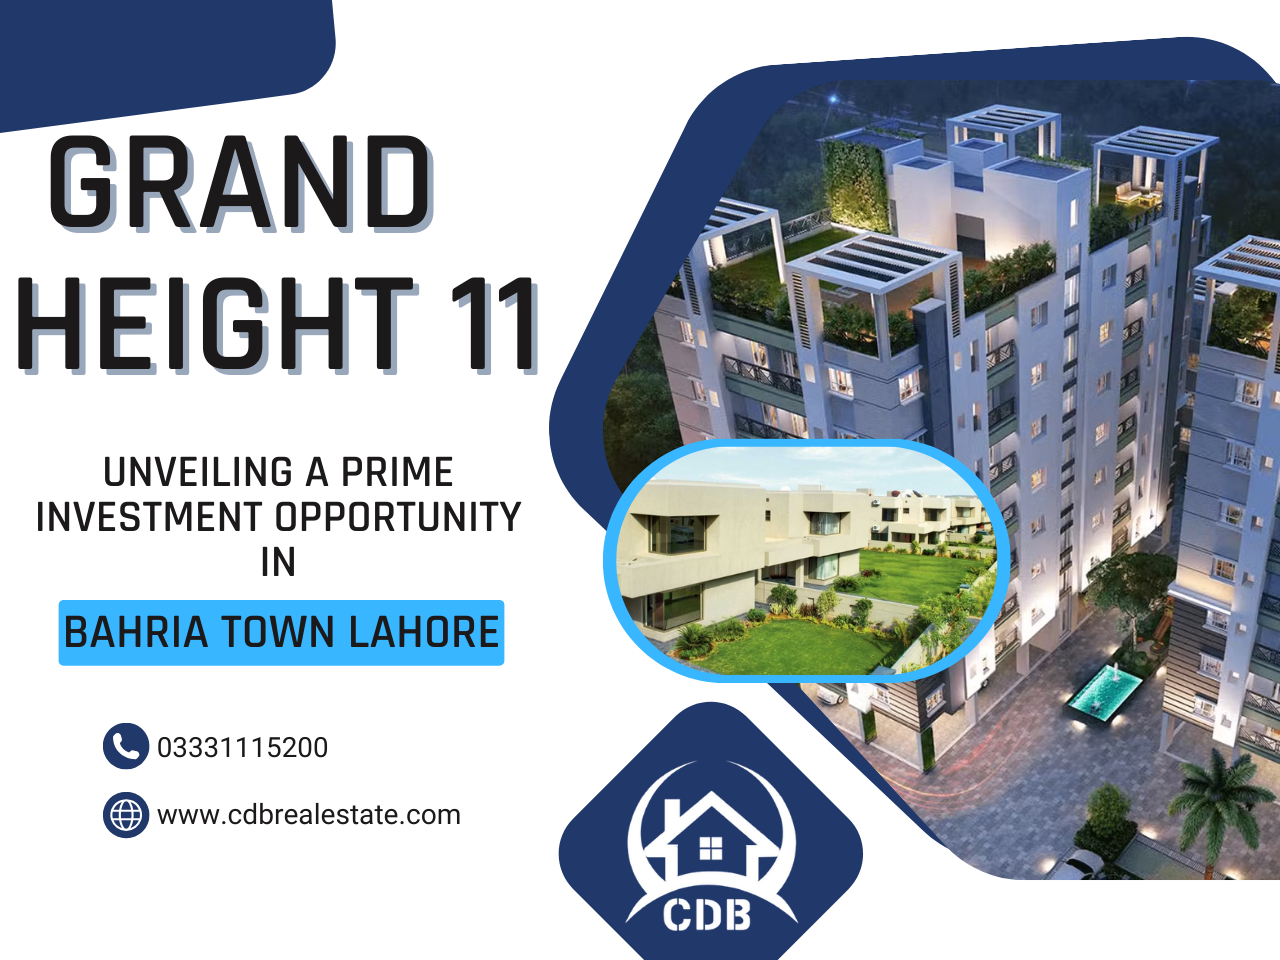 Grand height 11 bahria town lahore